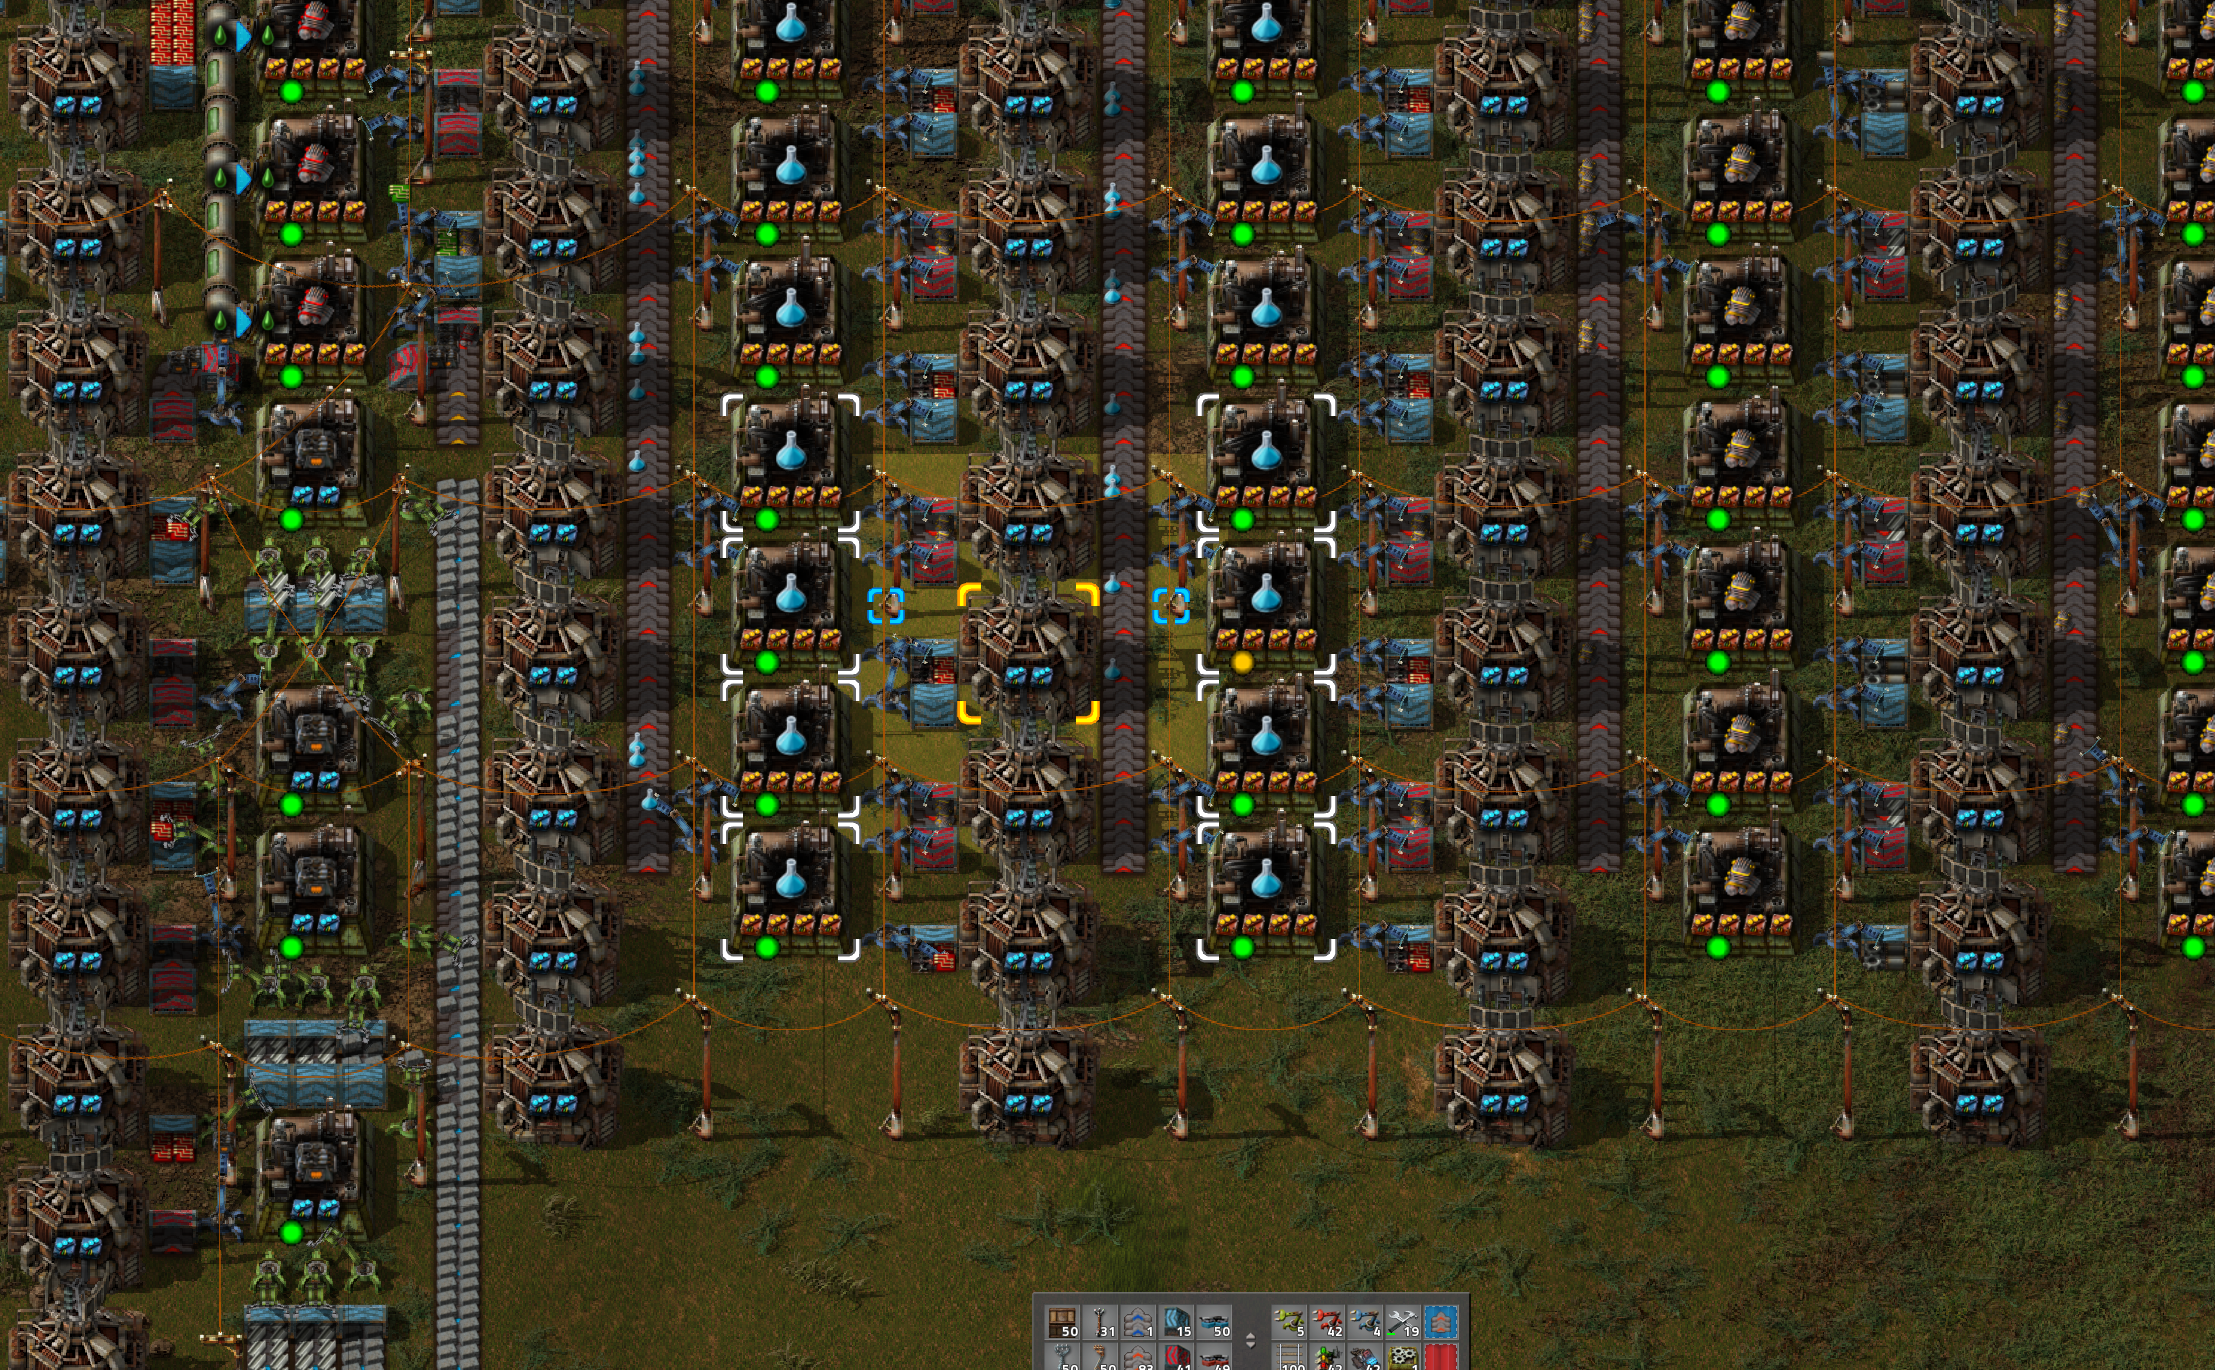 5 blue belts feeding electric furnace production.  (With room to run 2 more blue belts up the sides and under the inserters if needed).  Also note the engine and blue science builds using belt weaving.